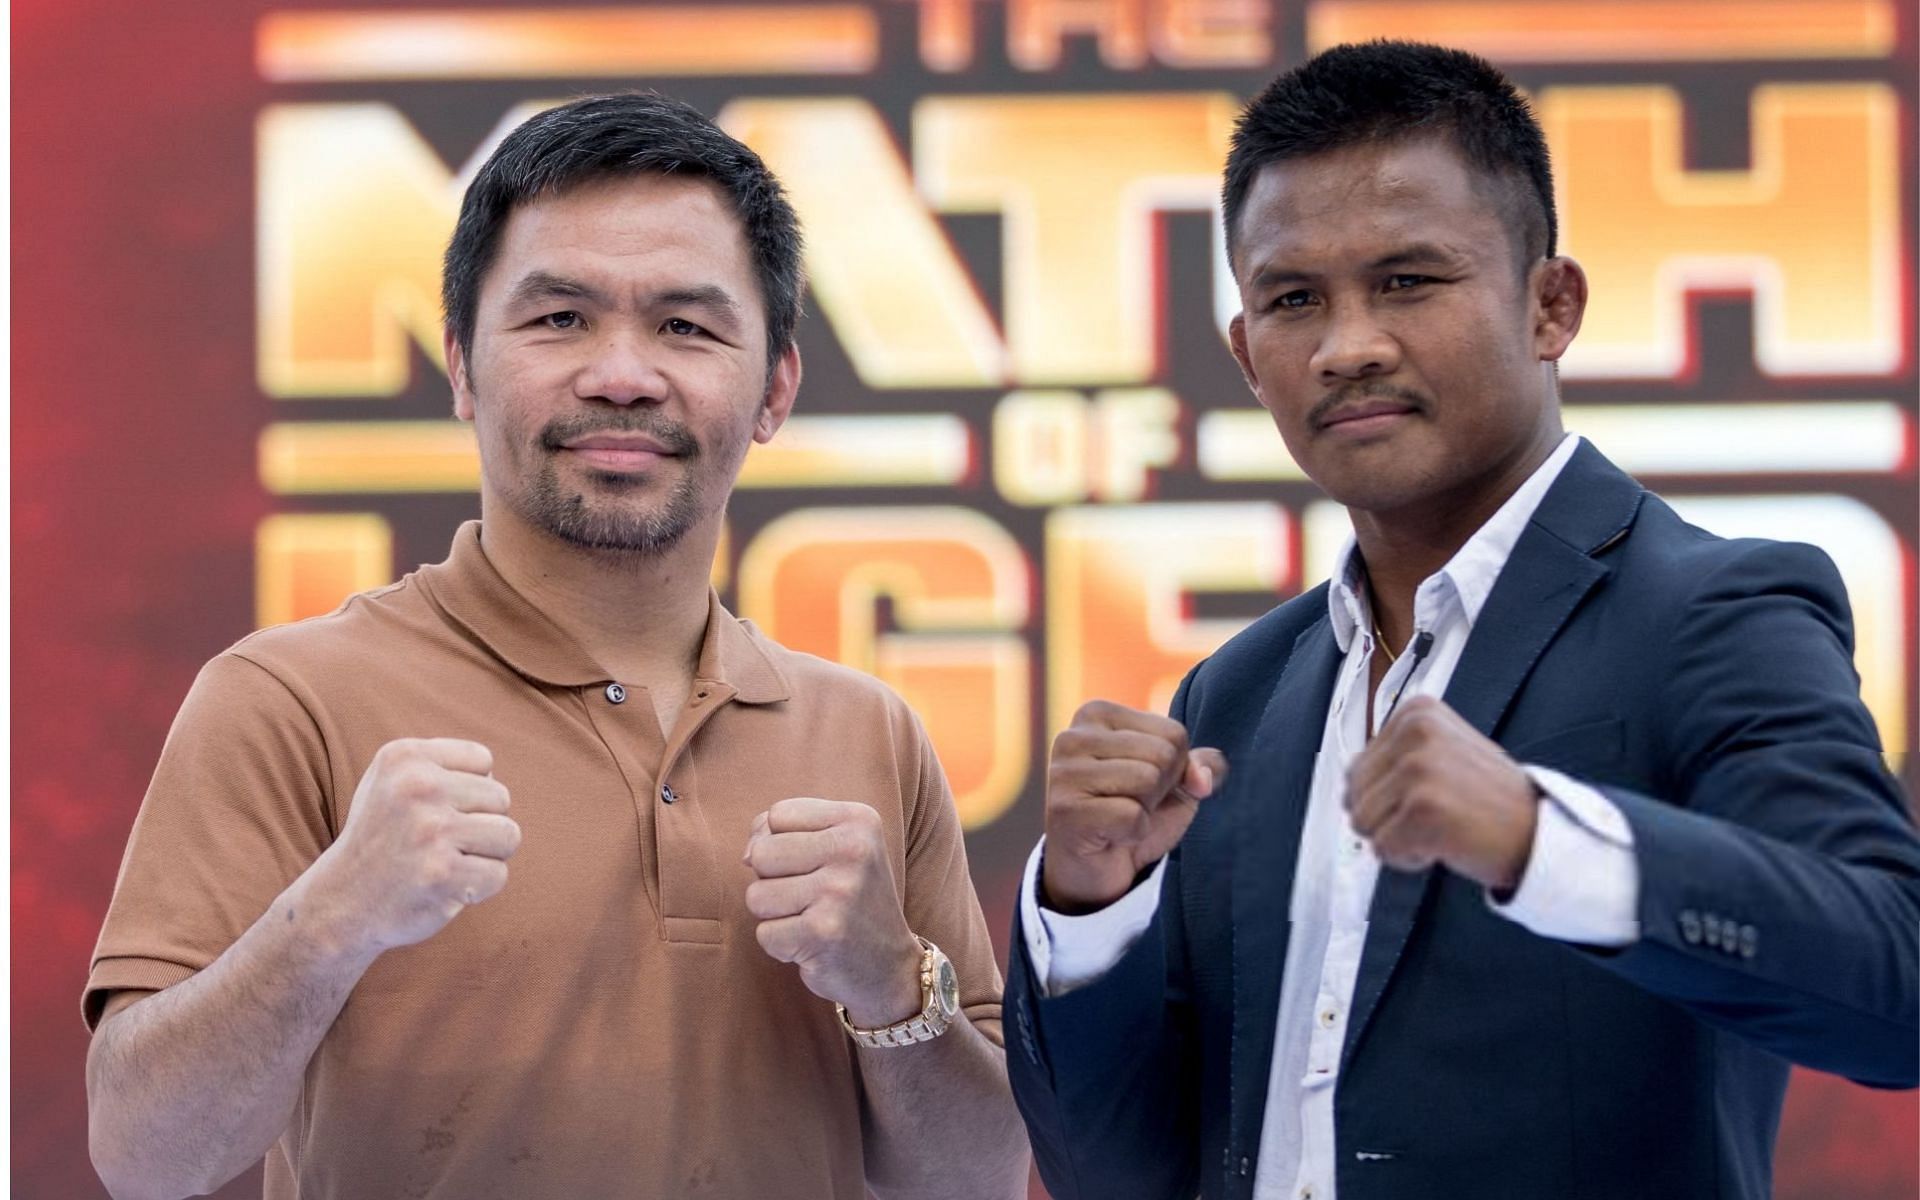 Manny Pacquiao and Buakaw posing at a pre-fight press conference [Image Courtesy: @GettyImages]